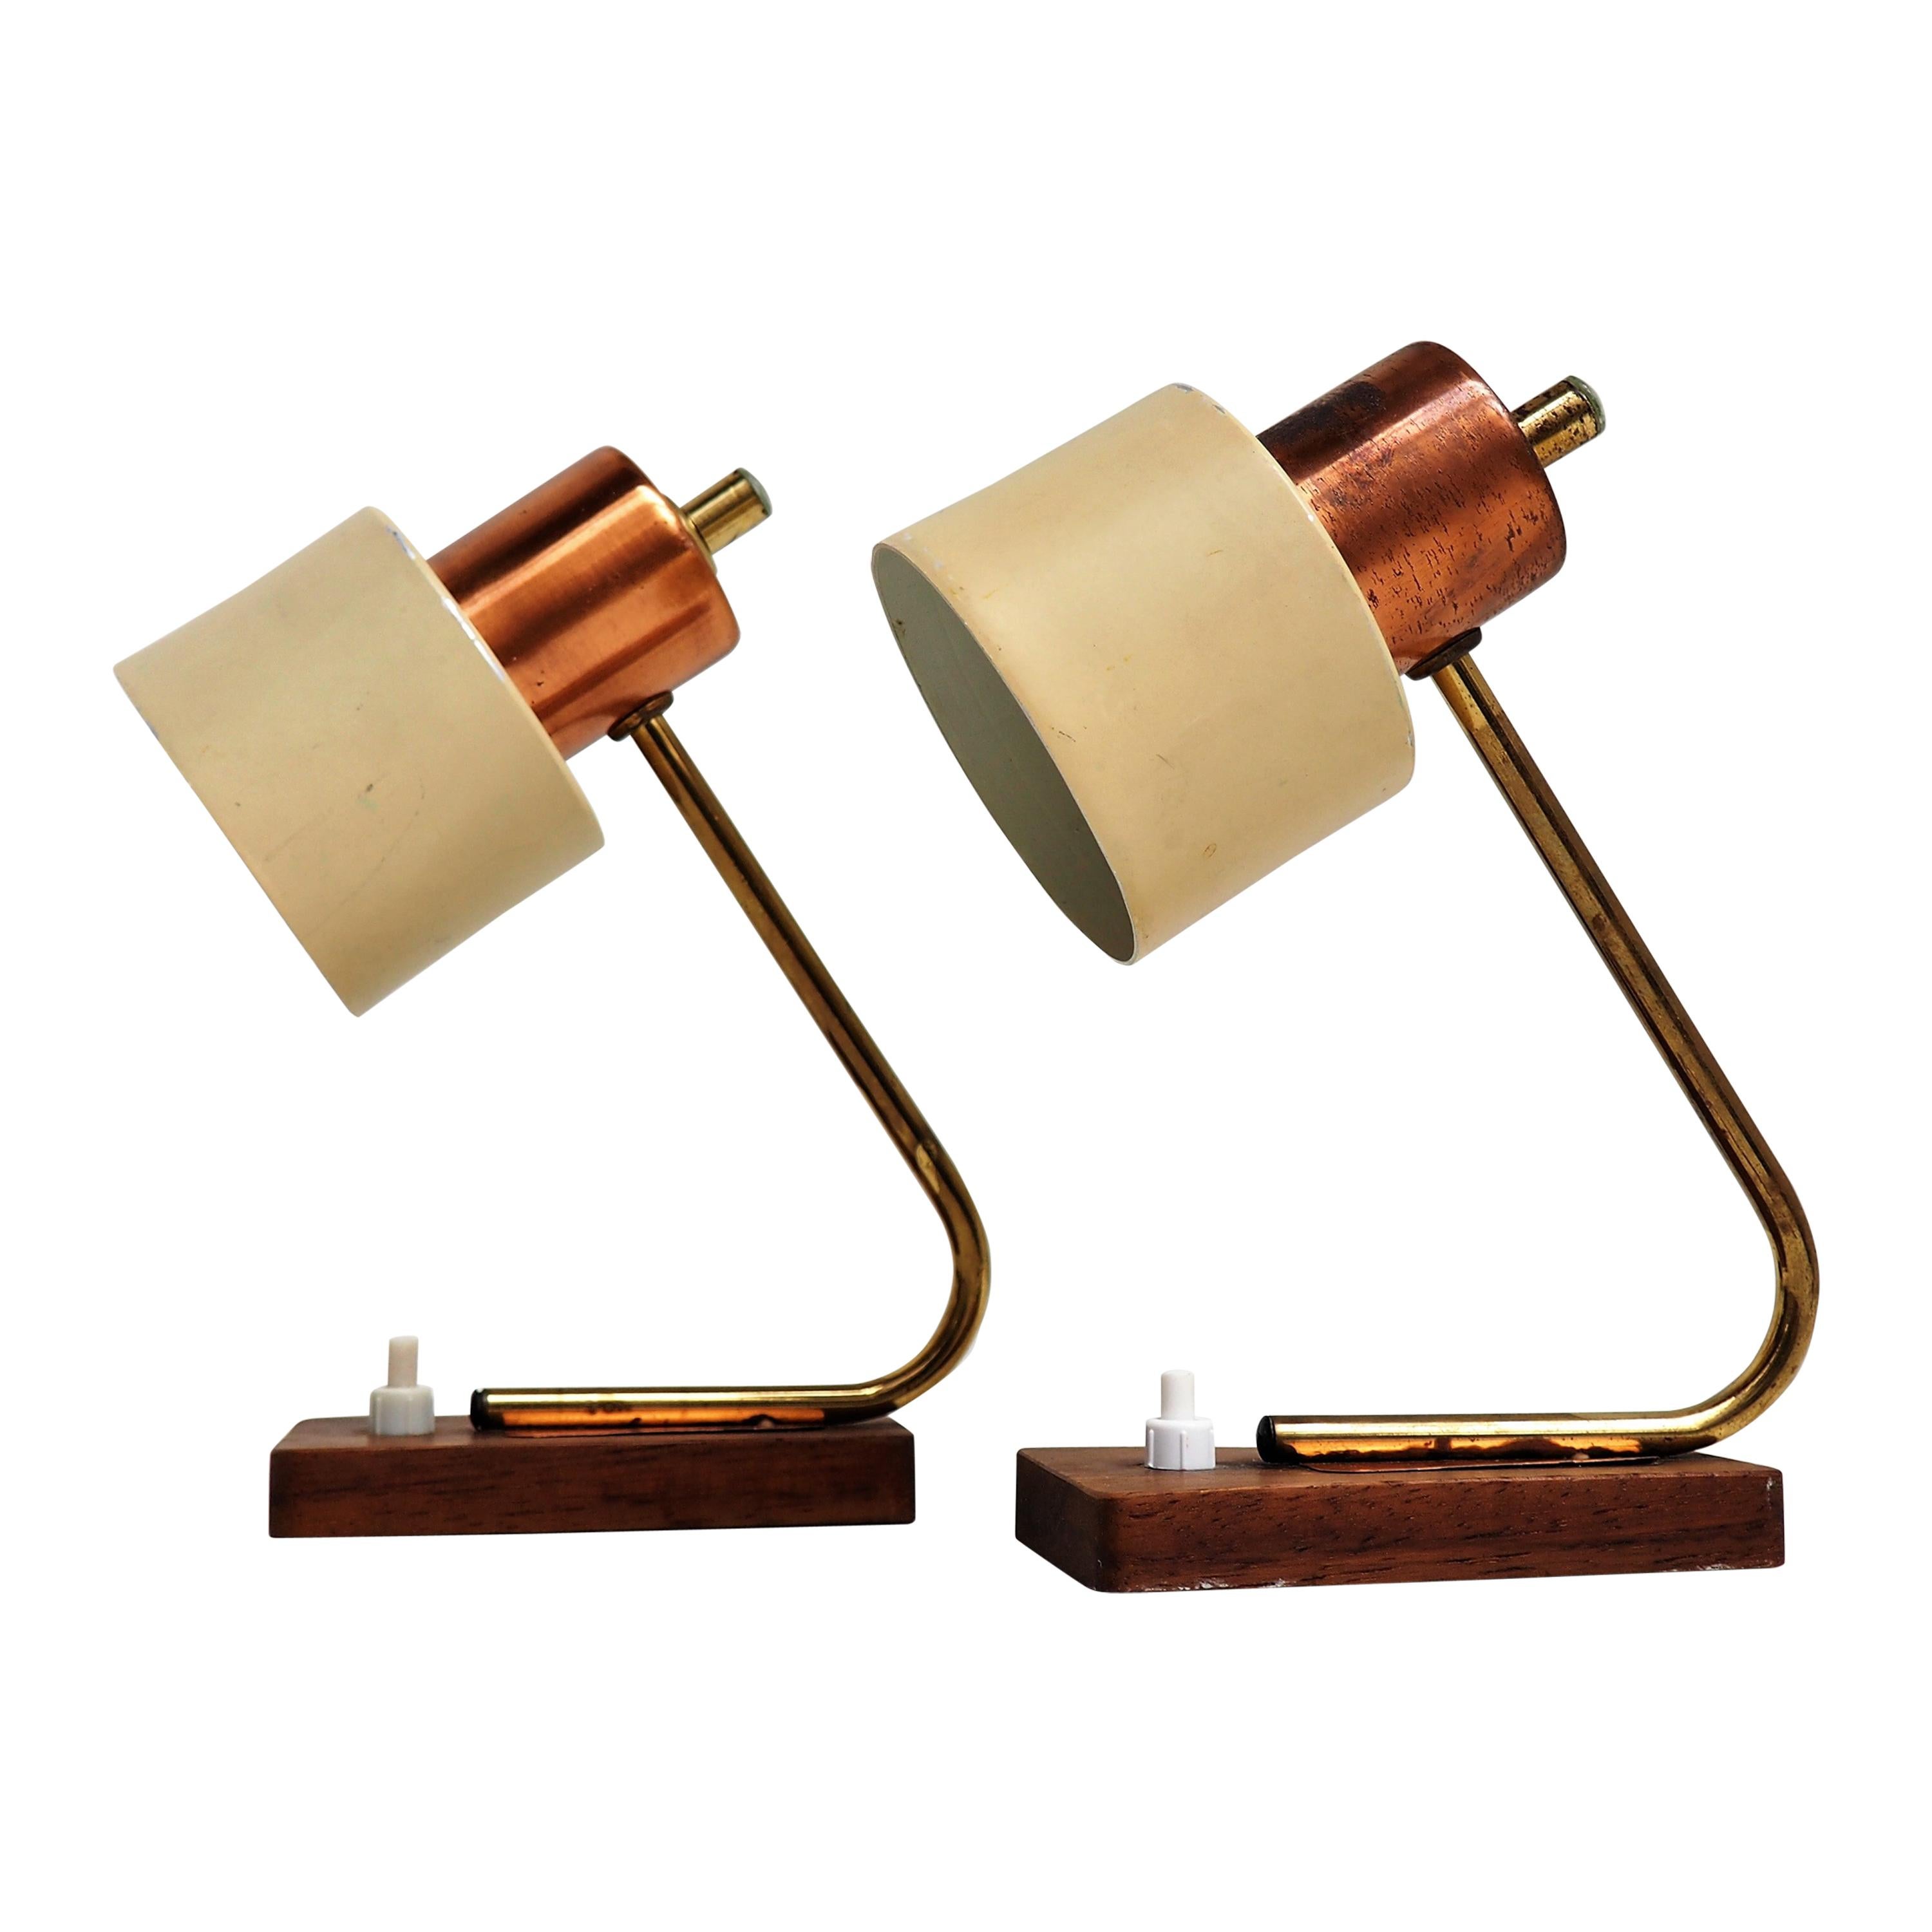 Adorable Pair of Stilnovo Table Lamp with Teak Base, Danish Design from the 1950 For Sale